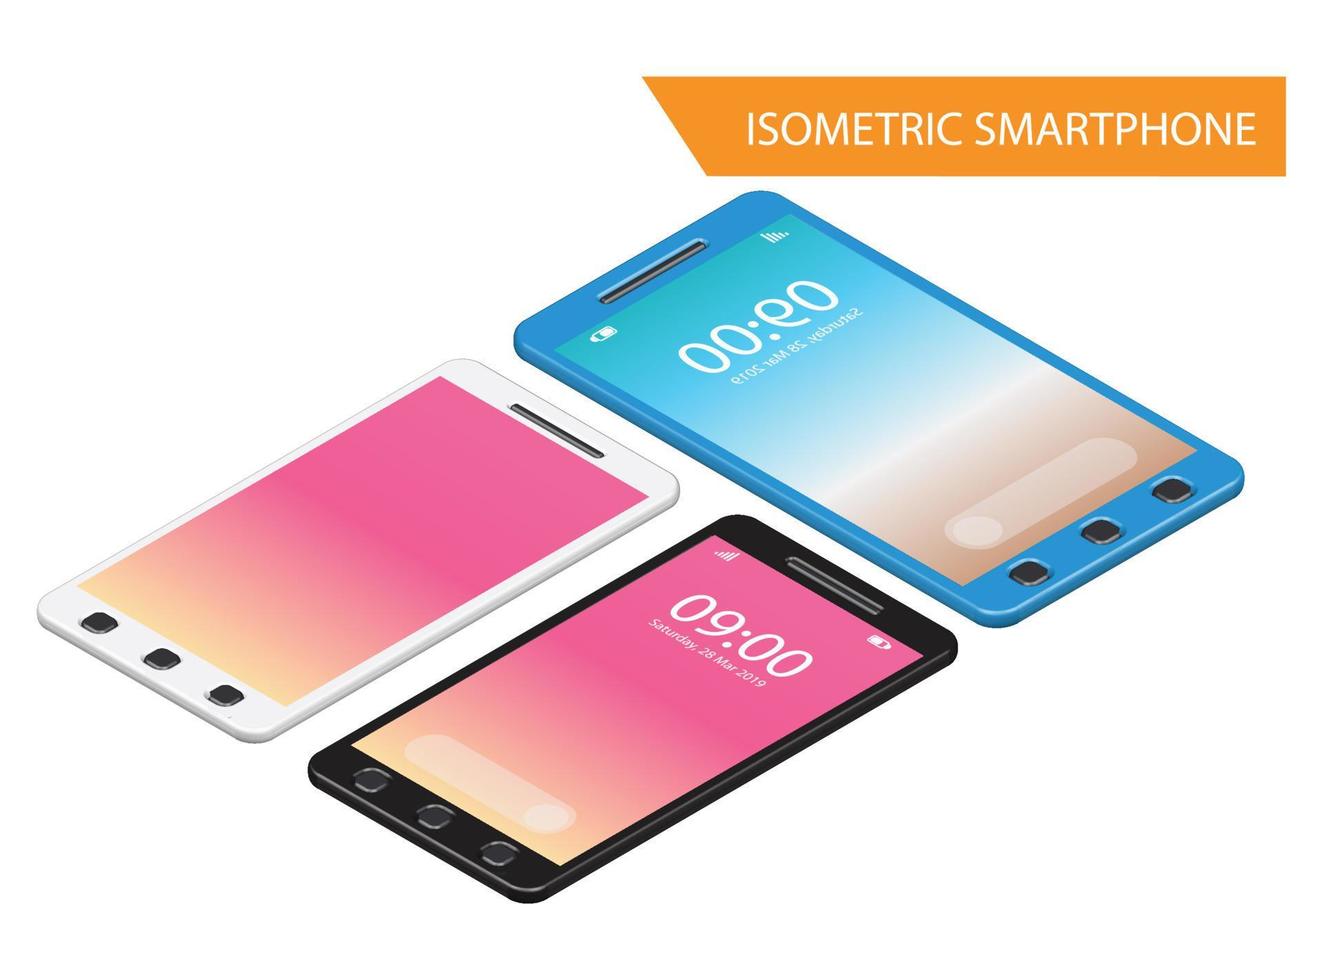 Modern Isometric Mockup Phone Illustration With Gradient, Suitable for Diagrams, Infographics, Game Asset, And Other Graphic Related Assets vector